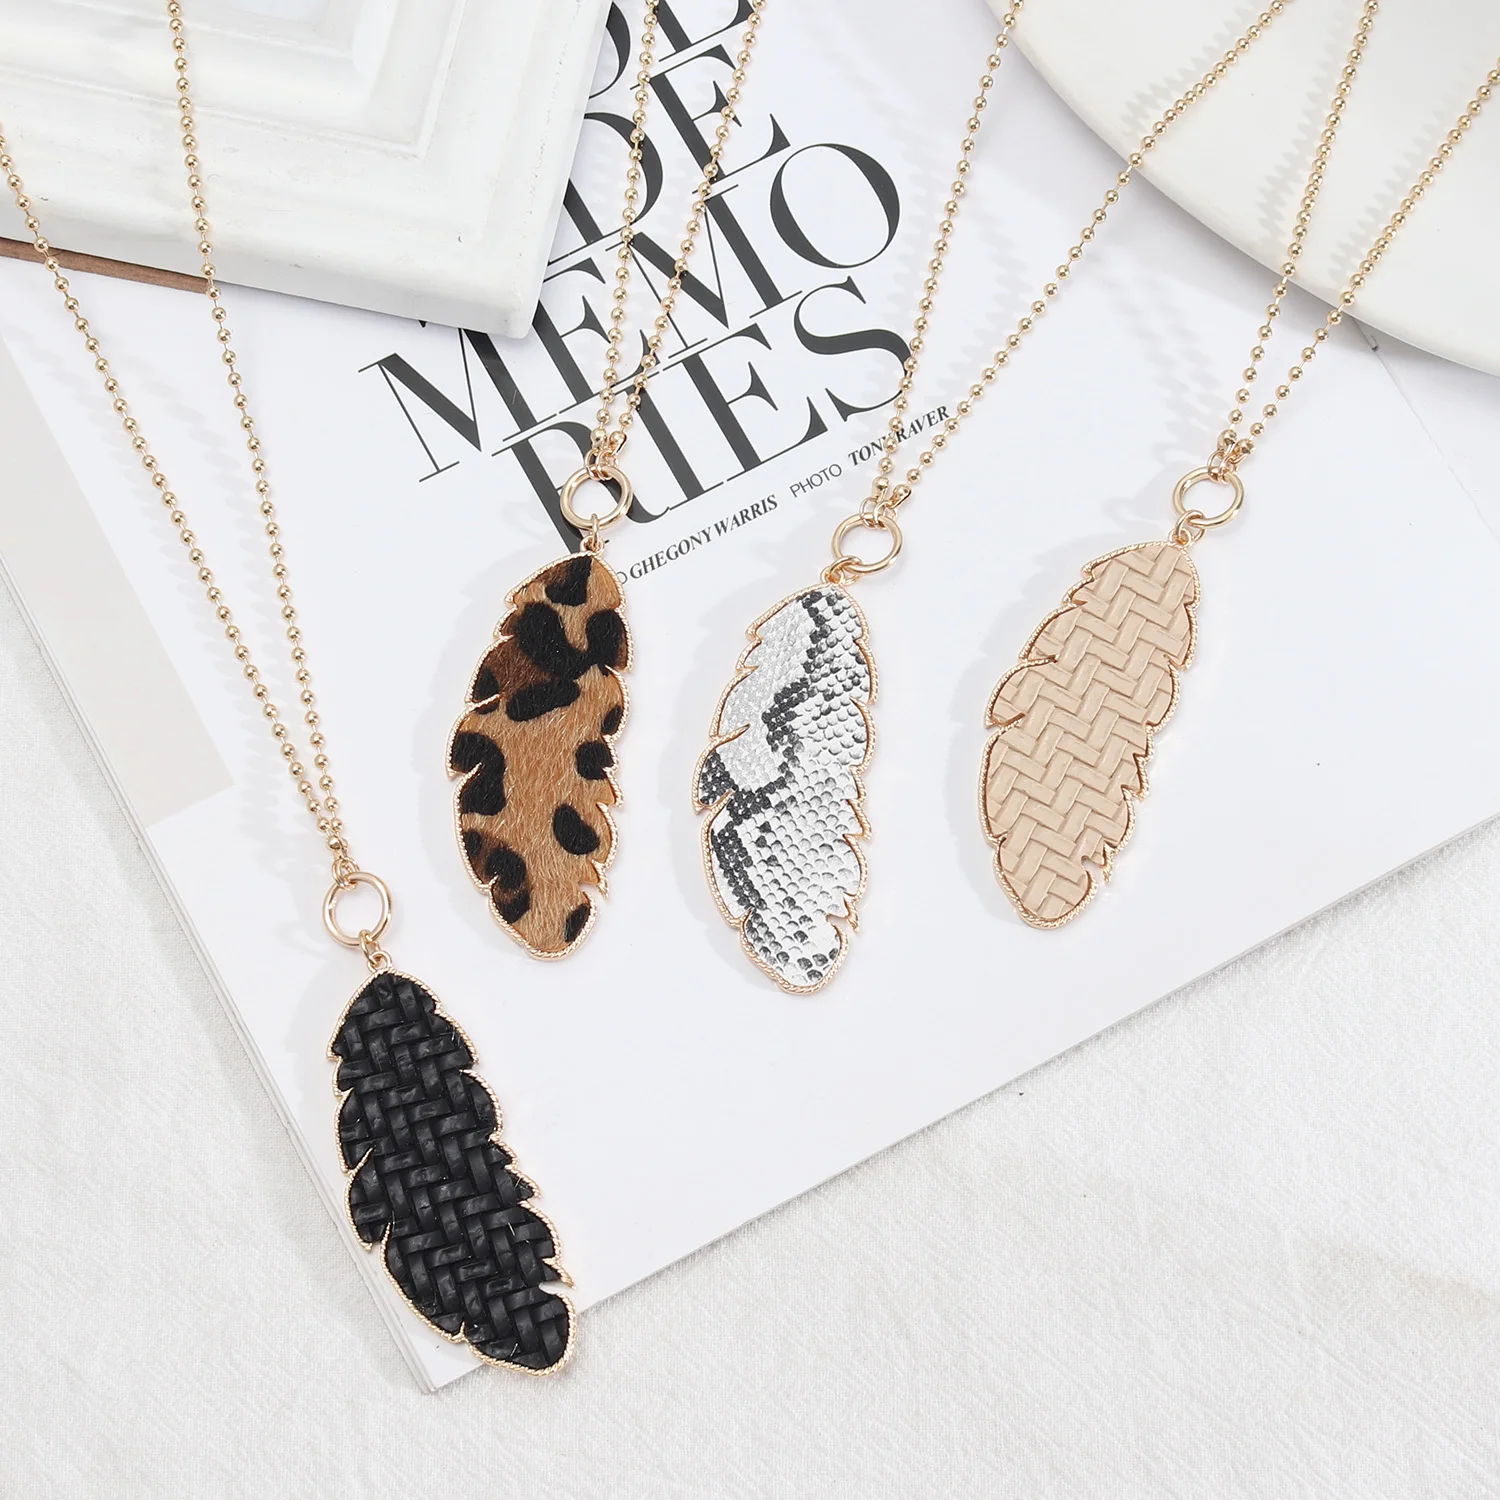 Snakeskin Feather Leopard Leather Pendant Necklaces Trendy Long Sweater Chain Fashion Jewelry for Women Wholesale